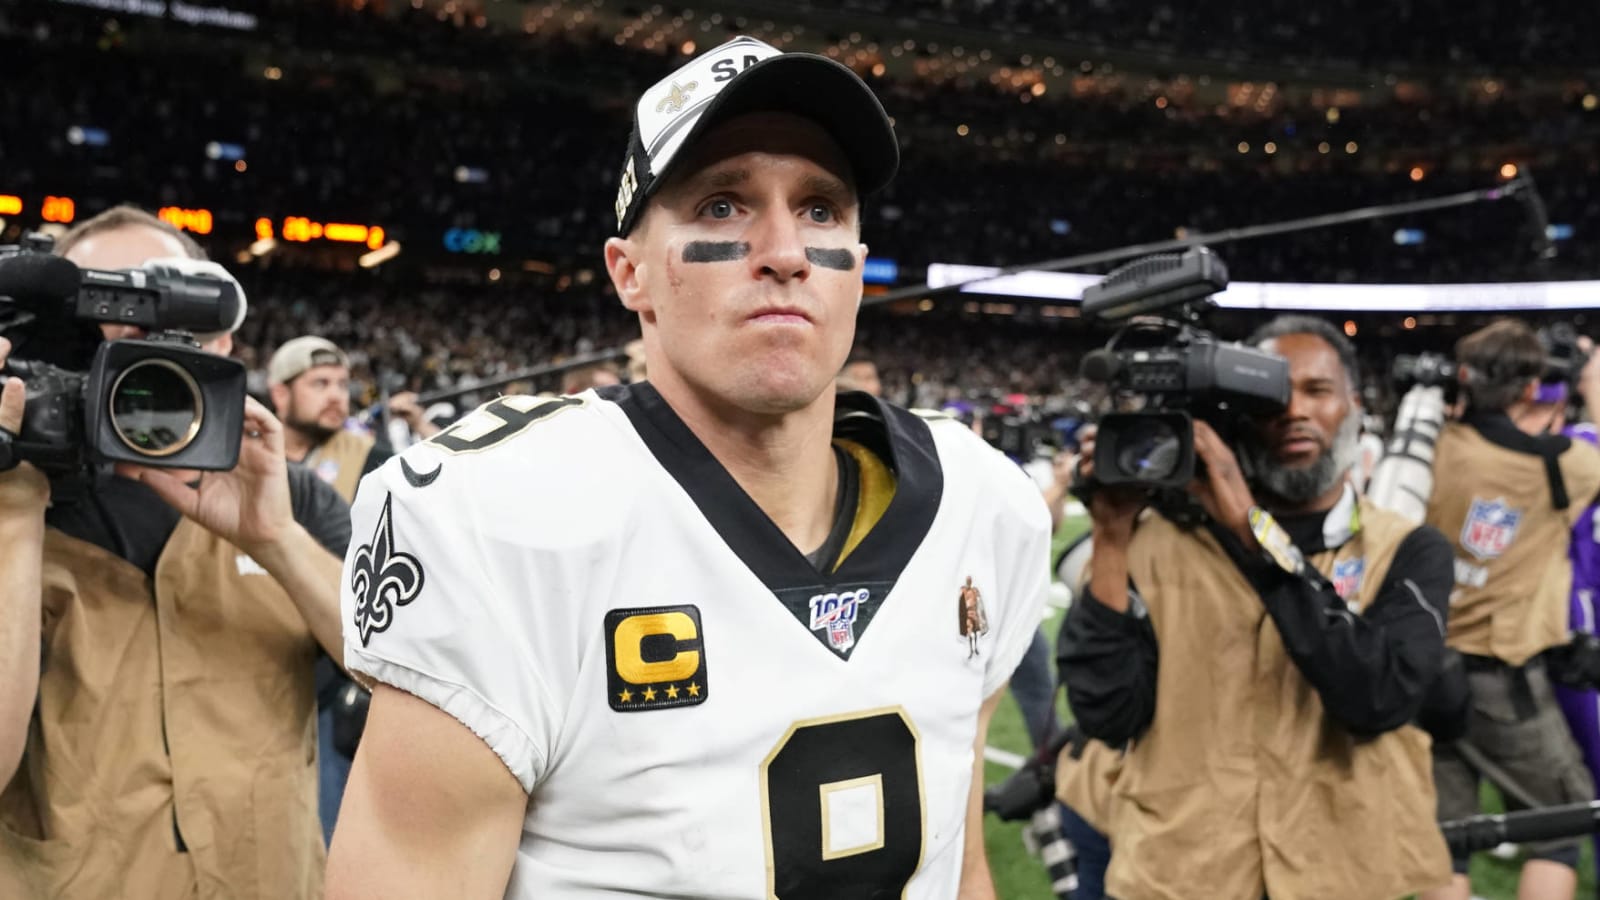 Eminem profanely calls out Drew Brees in new track with Kid Cudi